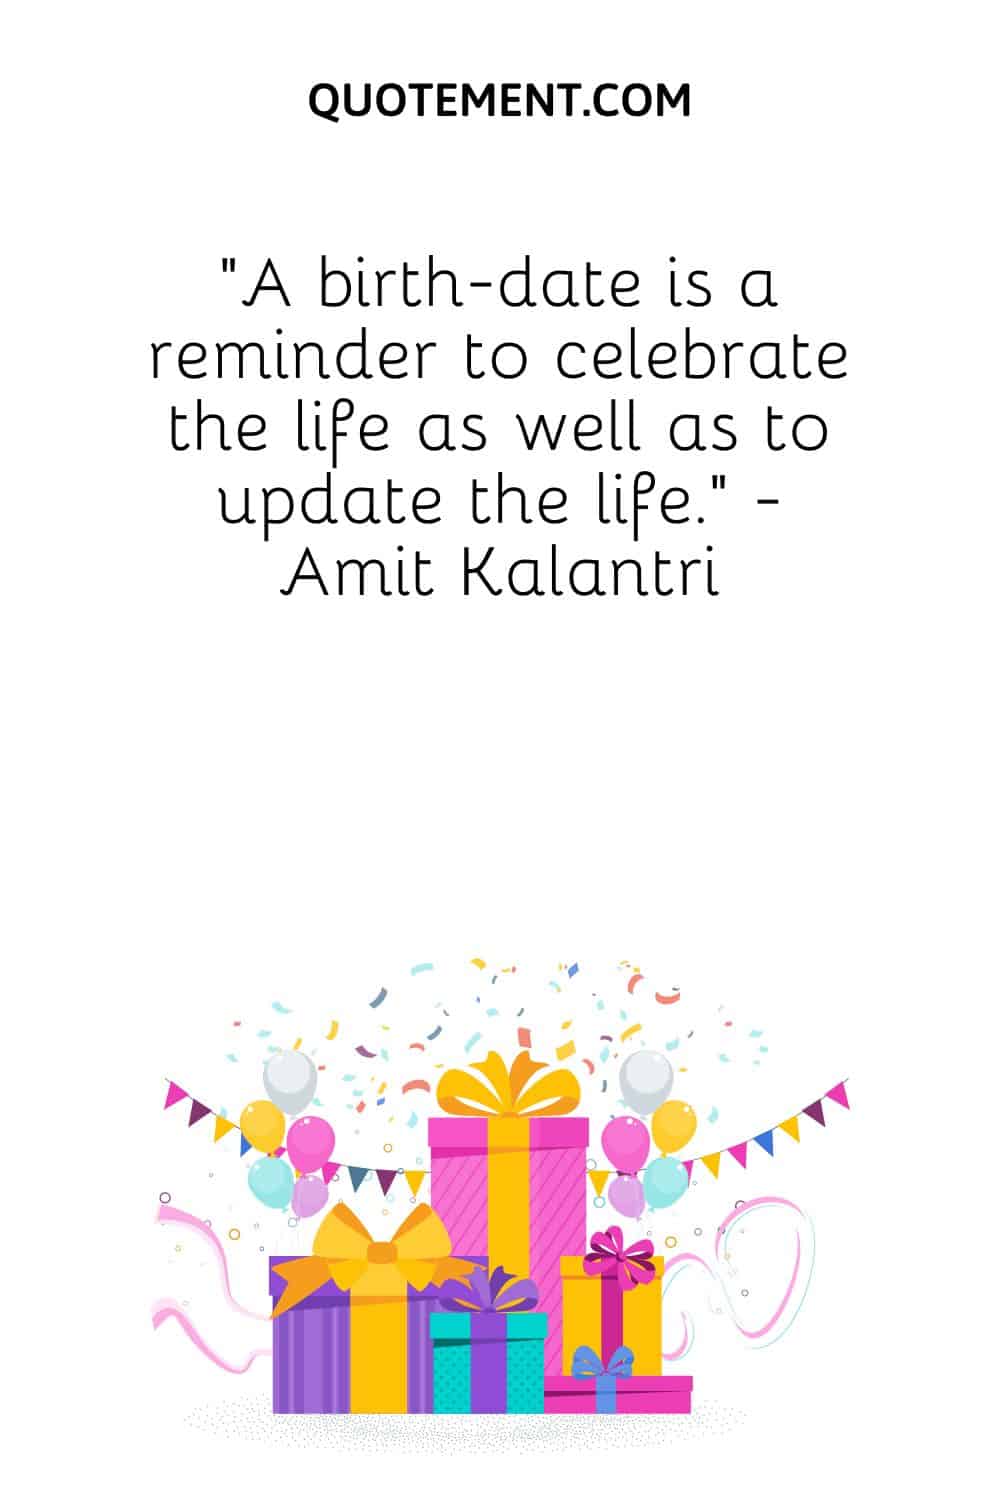 A birth-date is a reminder to celebrate the life as well as to update the life